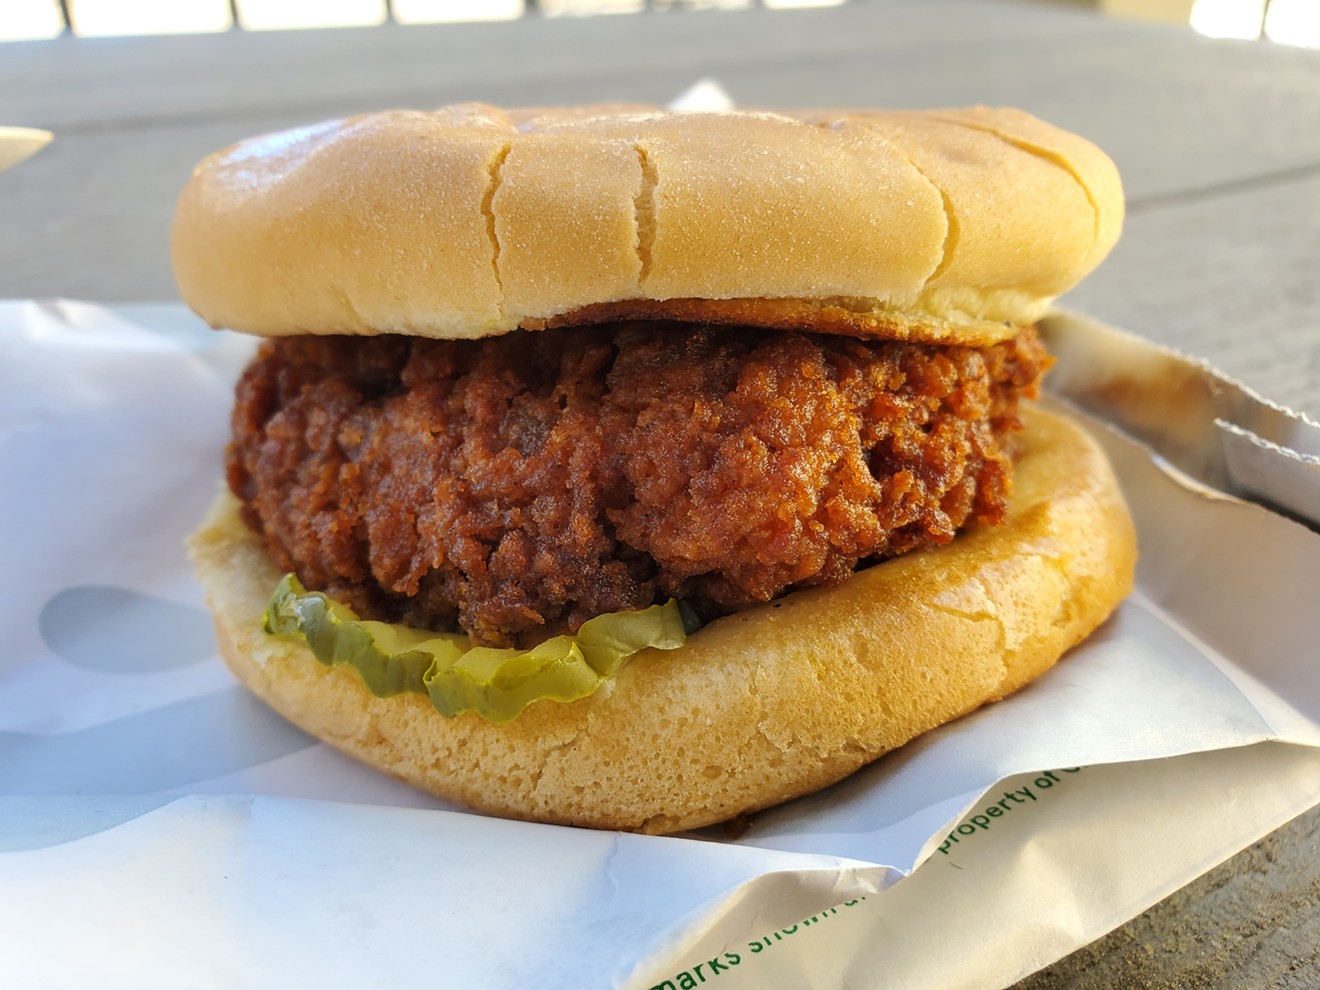 Chik-fil-A's new cauliflower sandwich comes with pickles, just like its original chicken version.